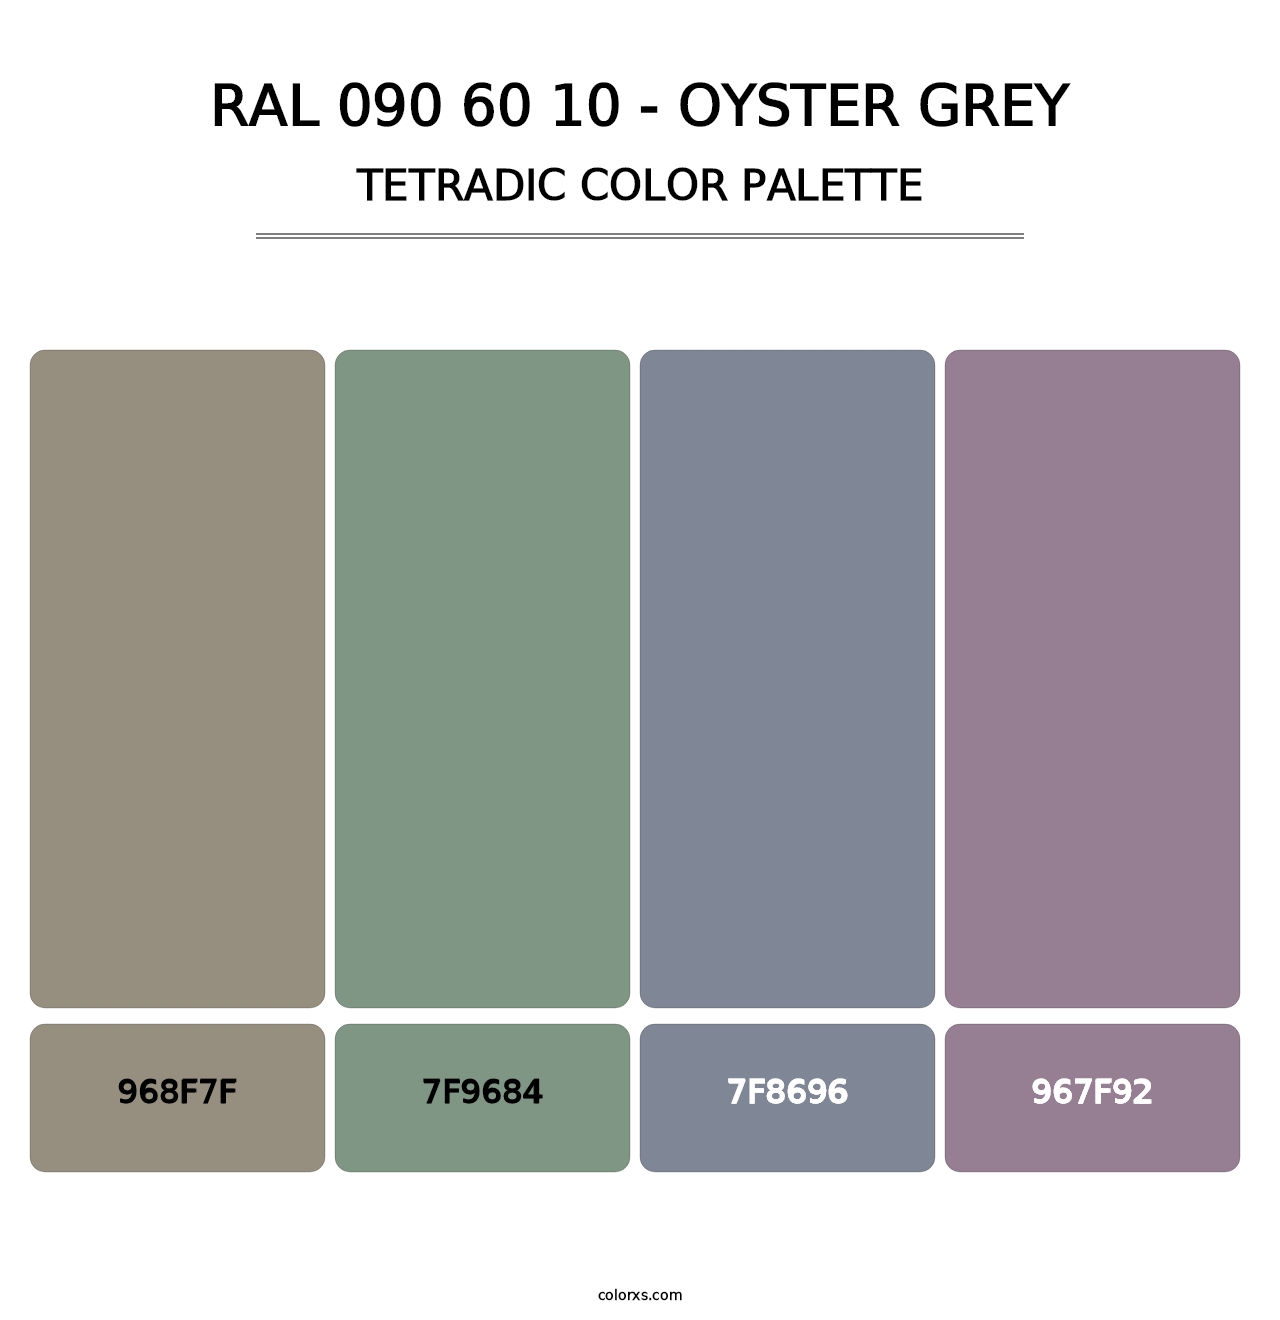 RAL 090 60 10 - Oyster Grey - Tetradic Color Palette